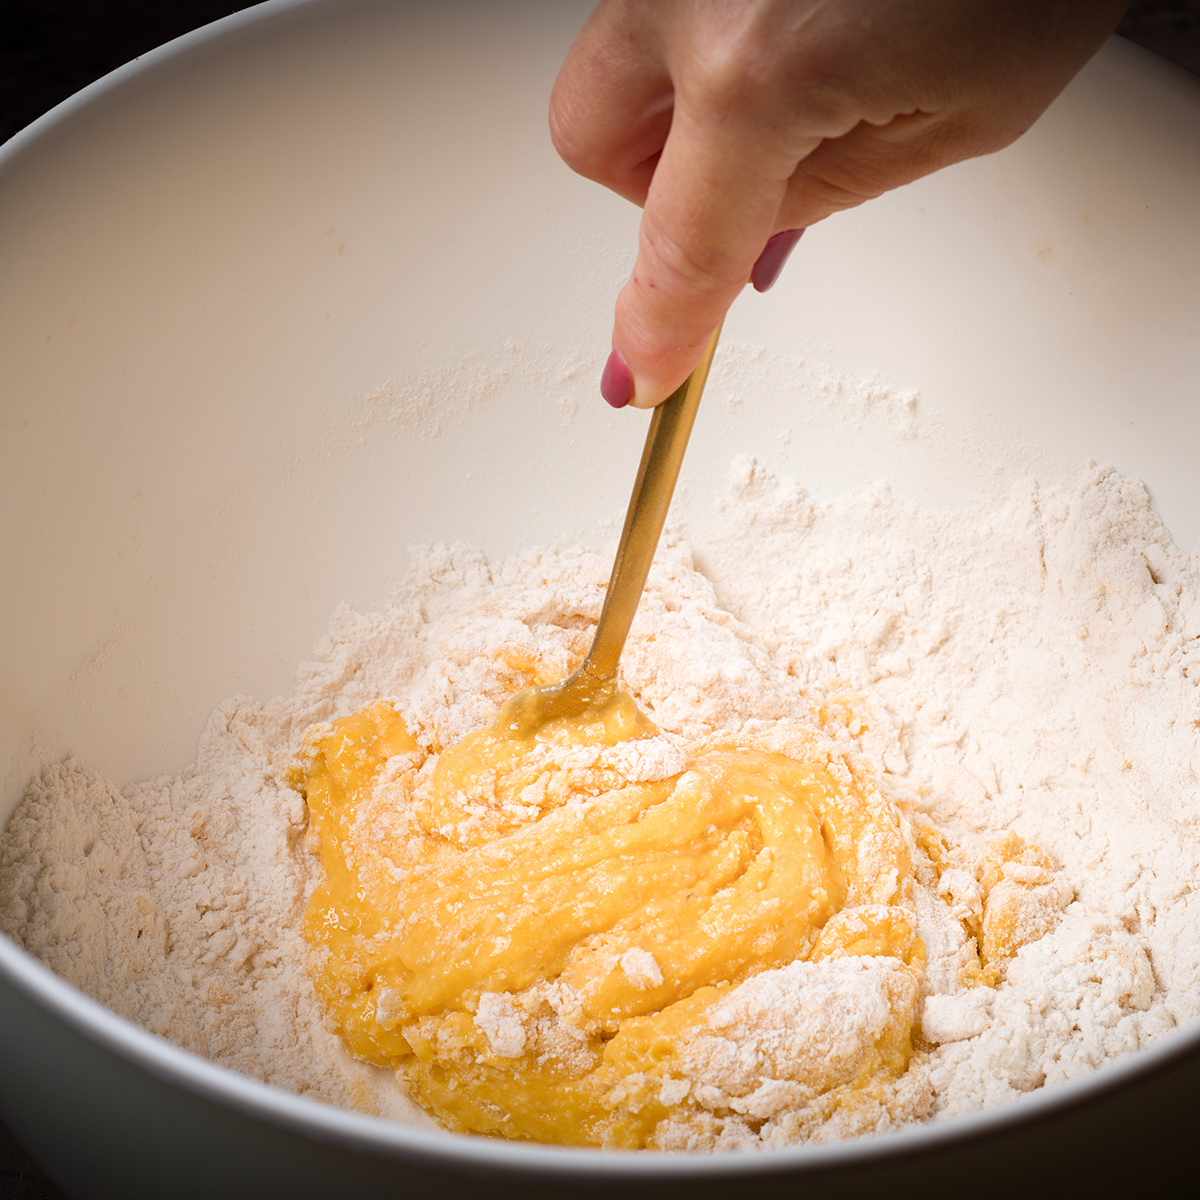 The mixture of eggs and flour will start to form a dough.